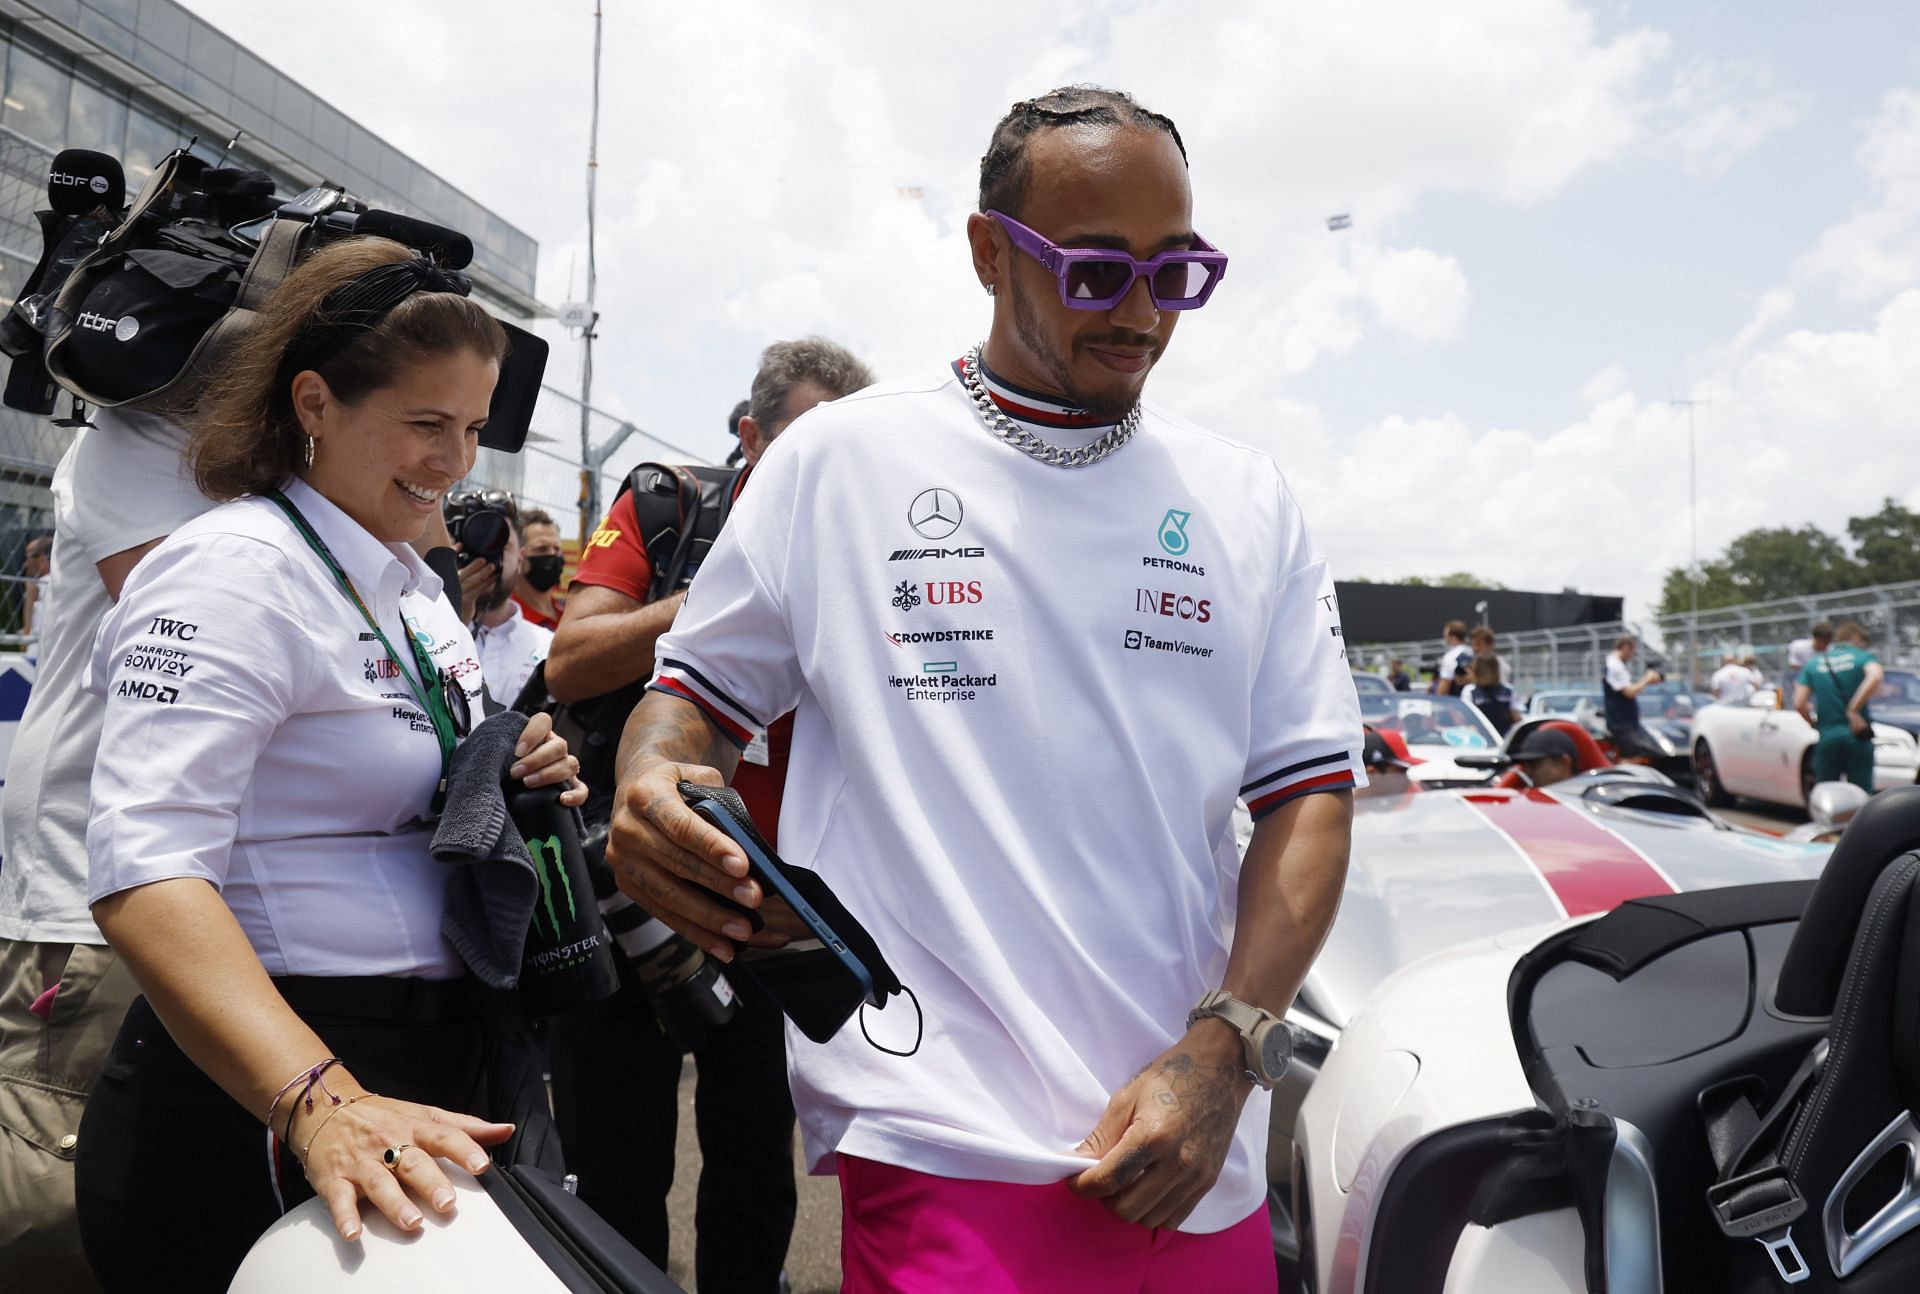 Lewis Hamilton of Great Britain and Mercedes looks on at the drivers parade prior to the F1 Grand Prix of Miami at the Miami International Autodrome on May 08, 2022 in Miami, Florida. (Photo by Chris Graythen/Getty Images)